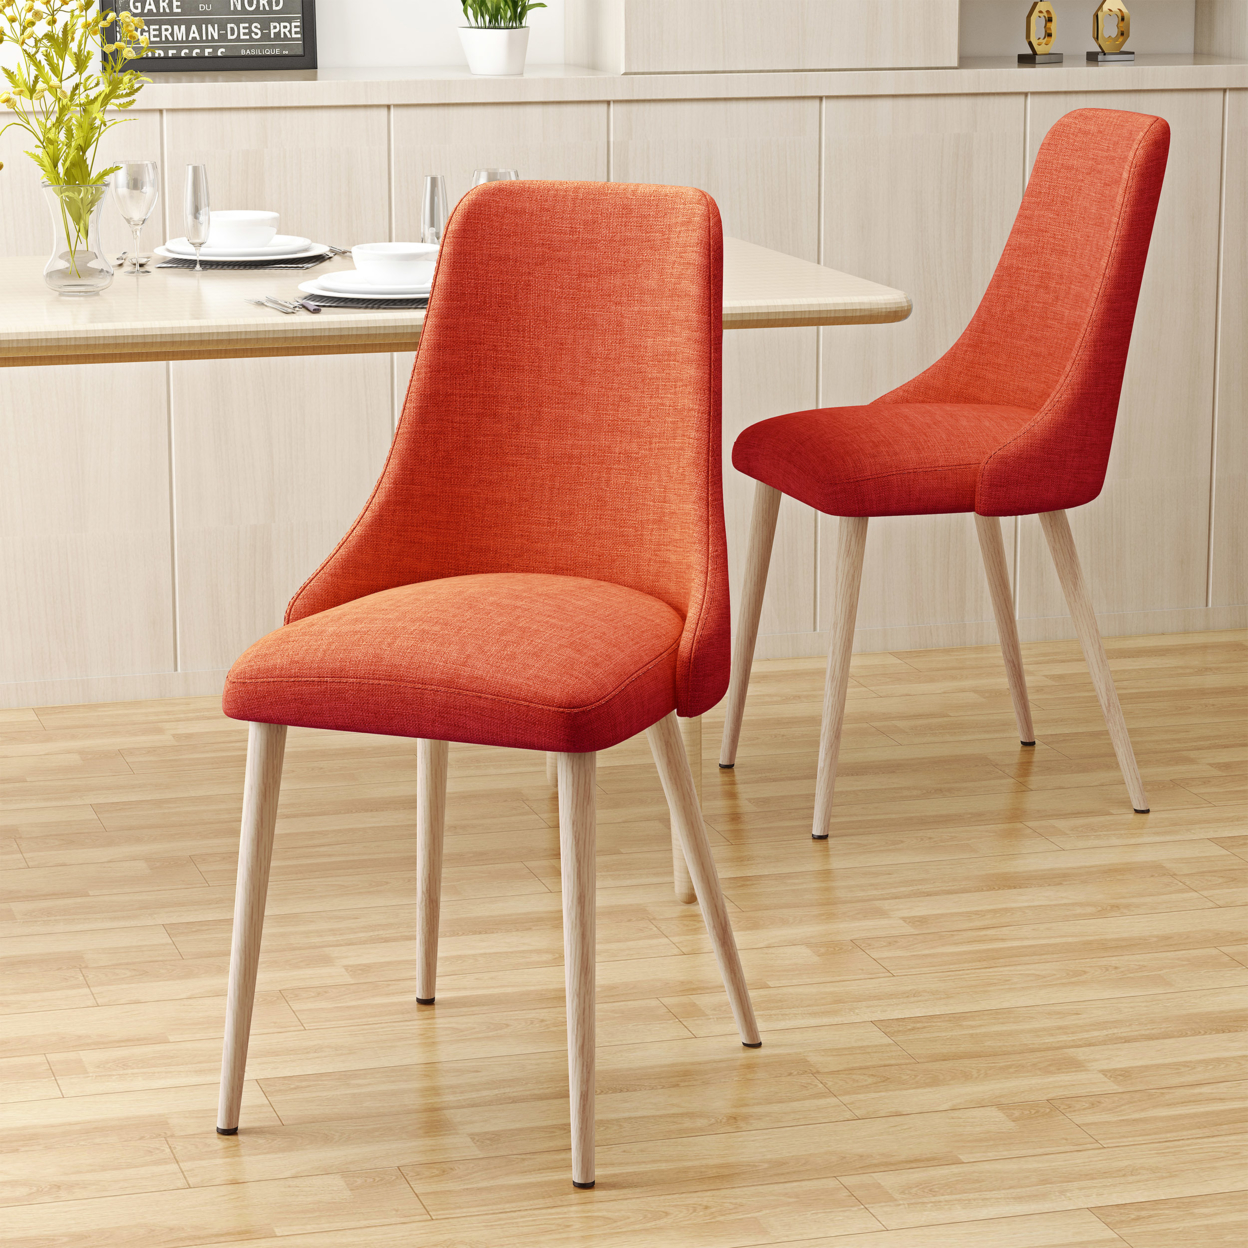 Soloman Mid Century Fabric Dining Chairs With Wood Finished Legs - Set Of 2 - Muted Orange